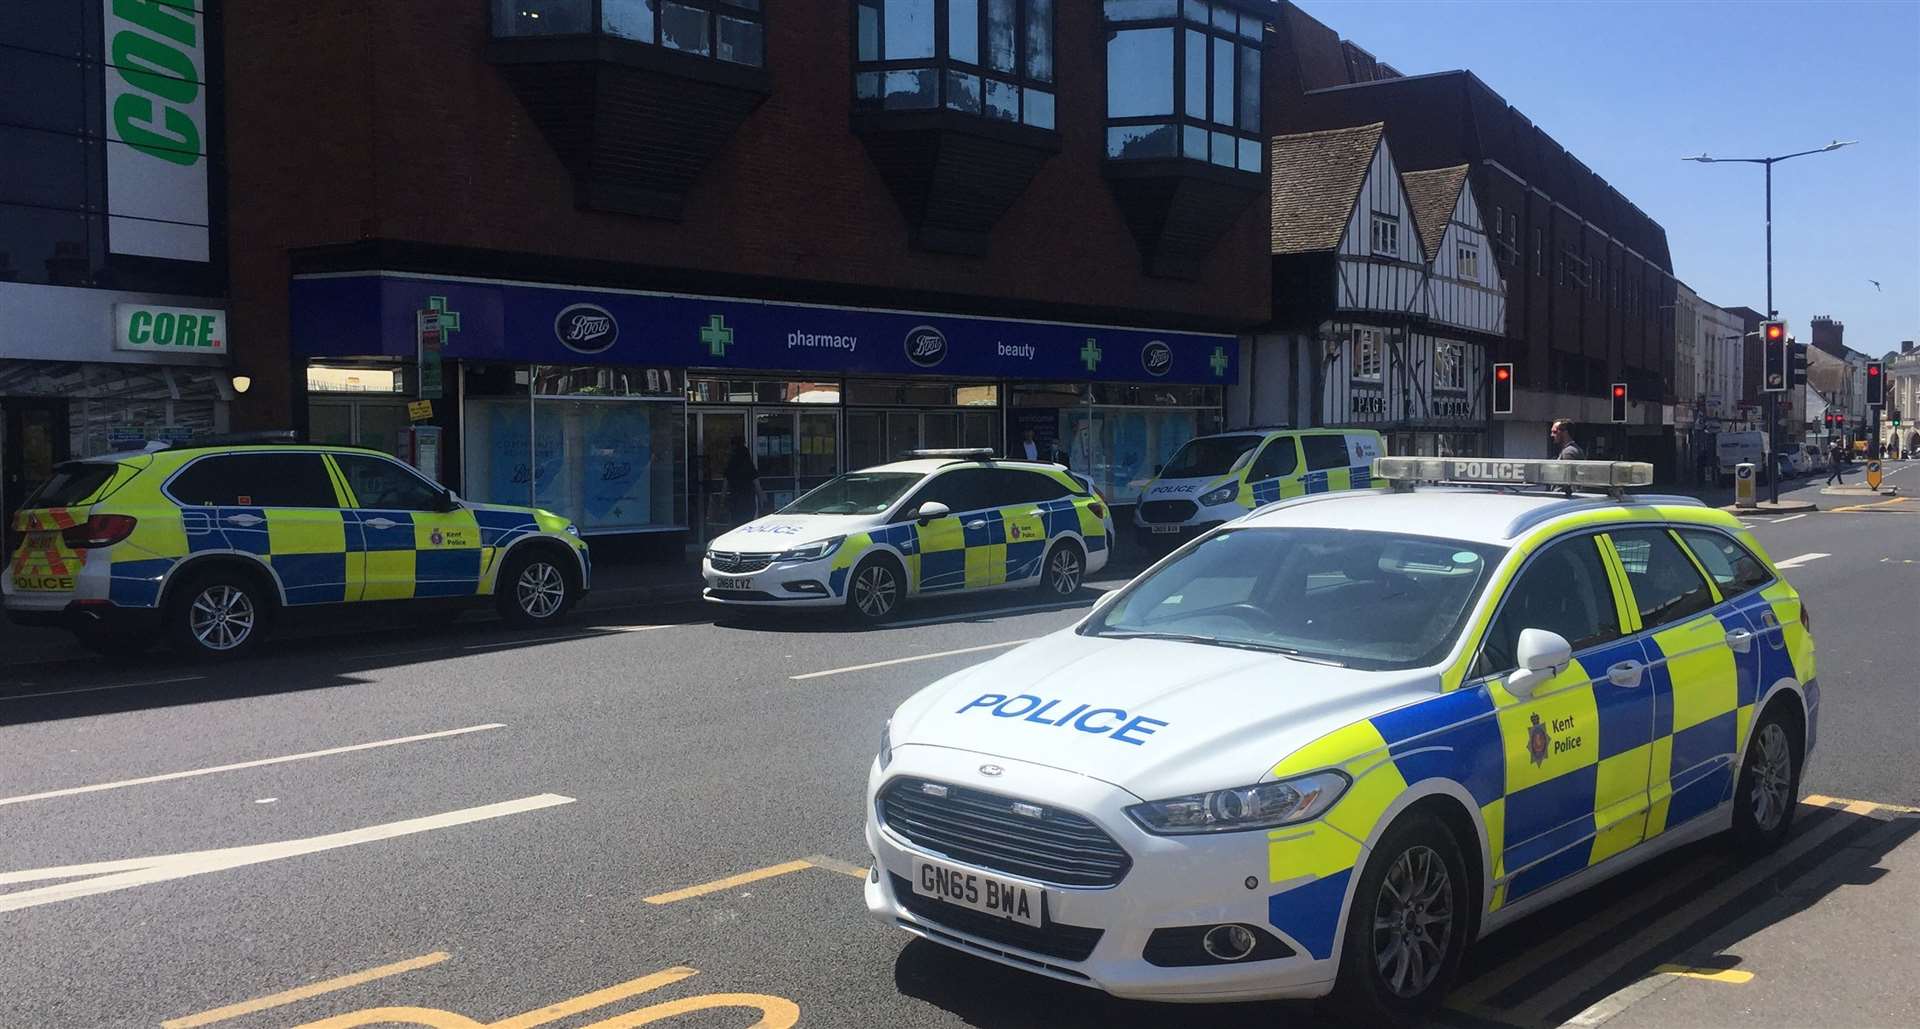 Five police cars were outside Boots on King Street, Maidstone